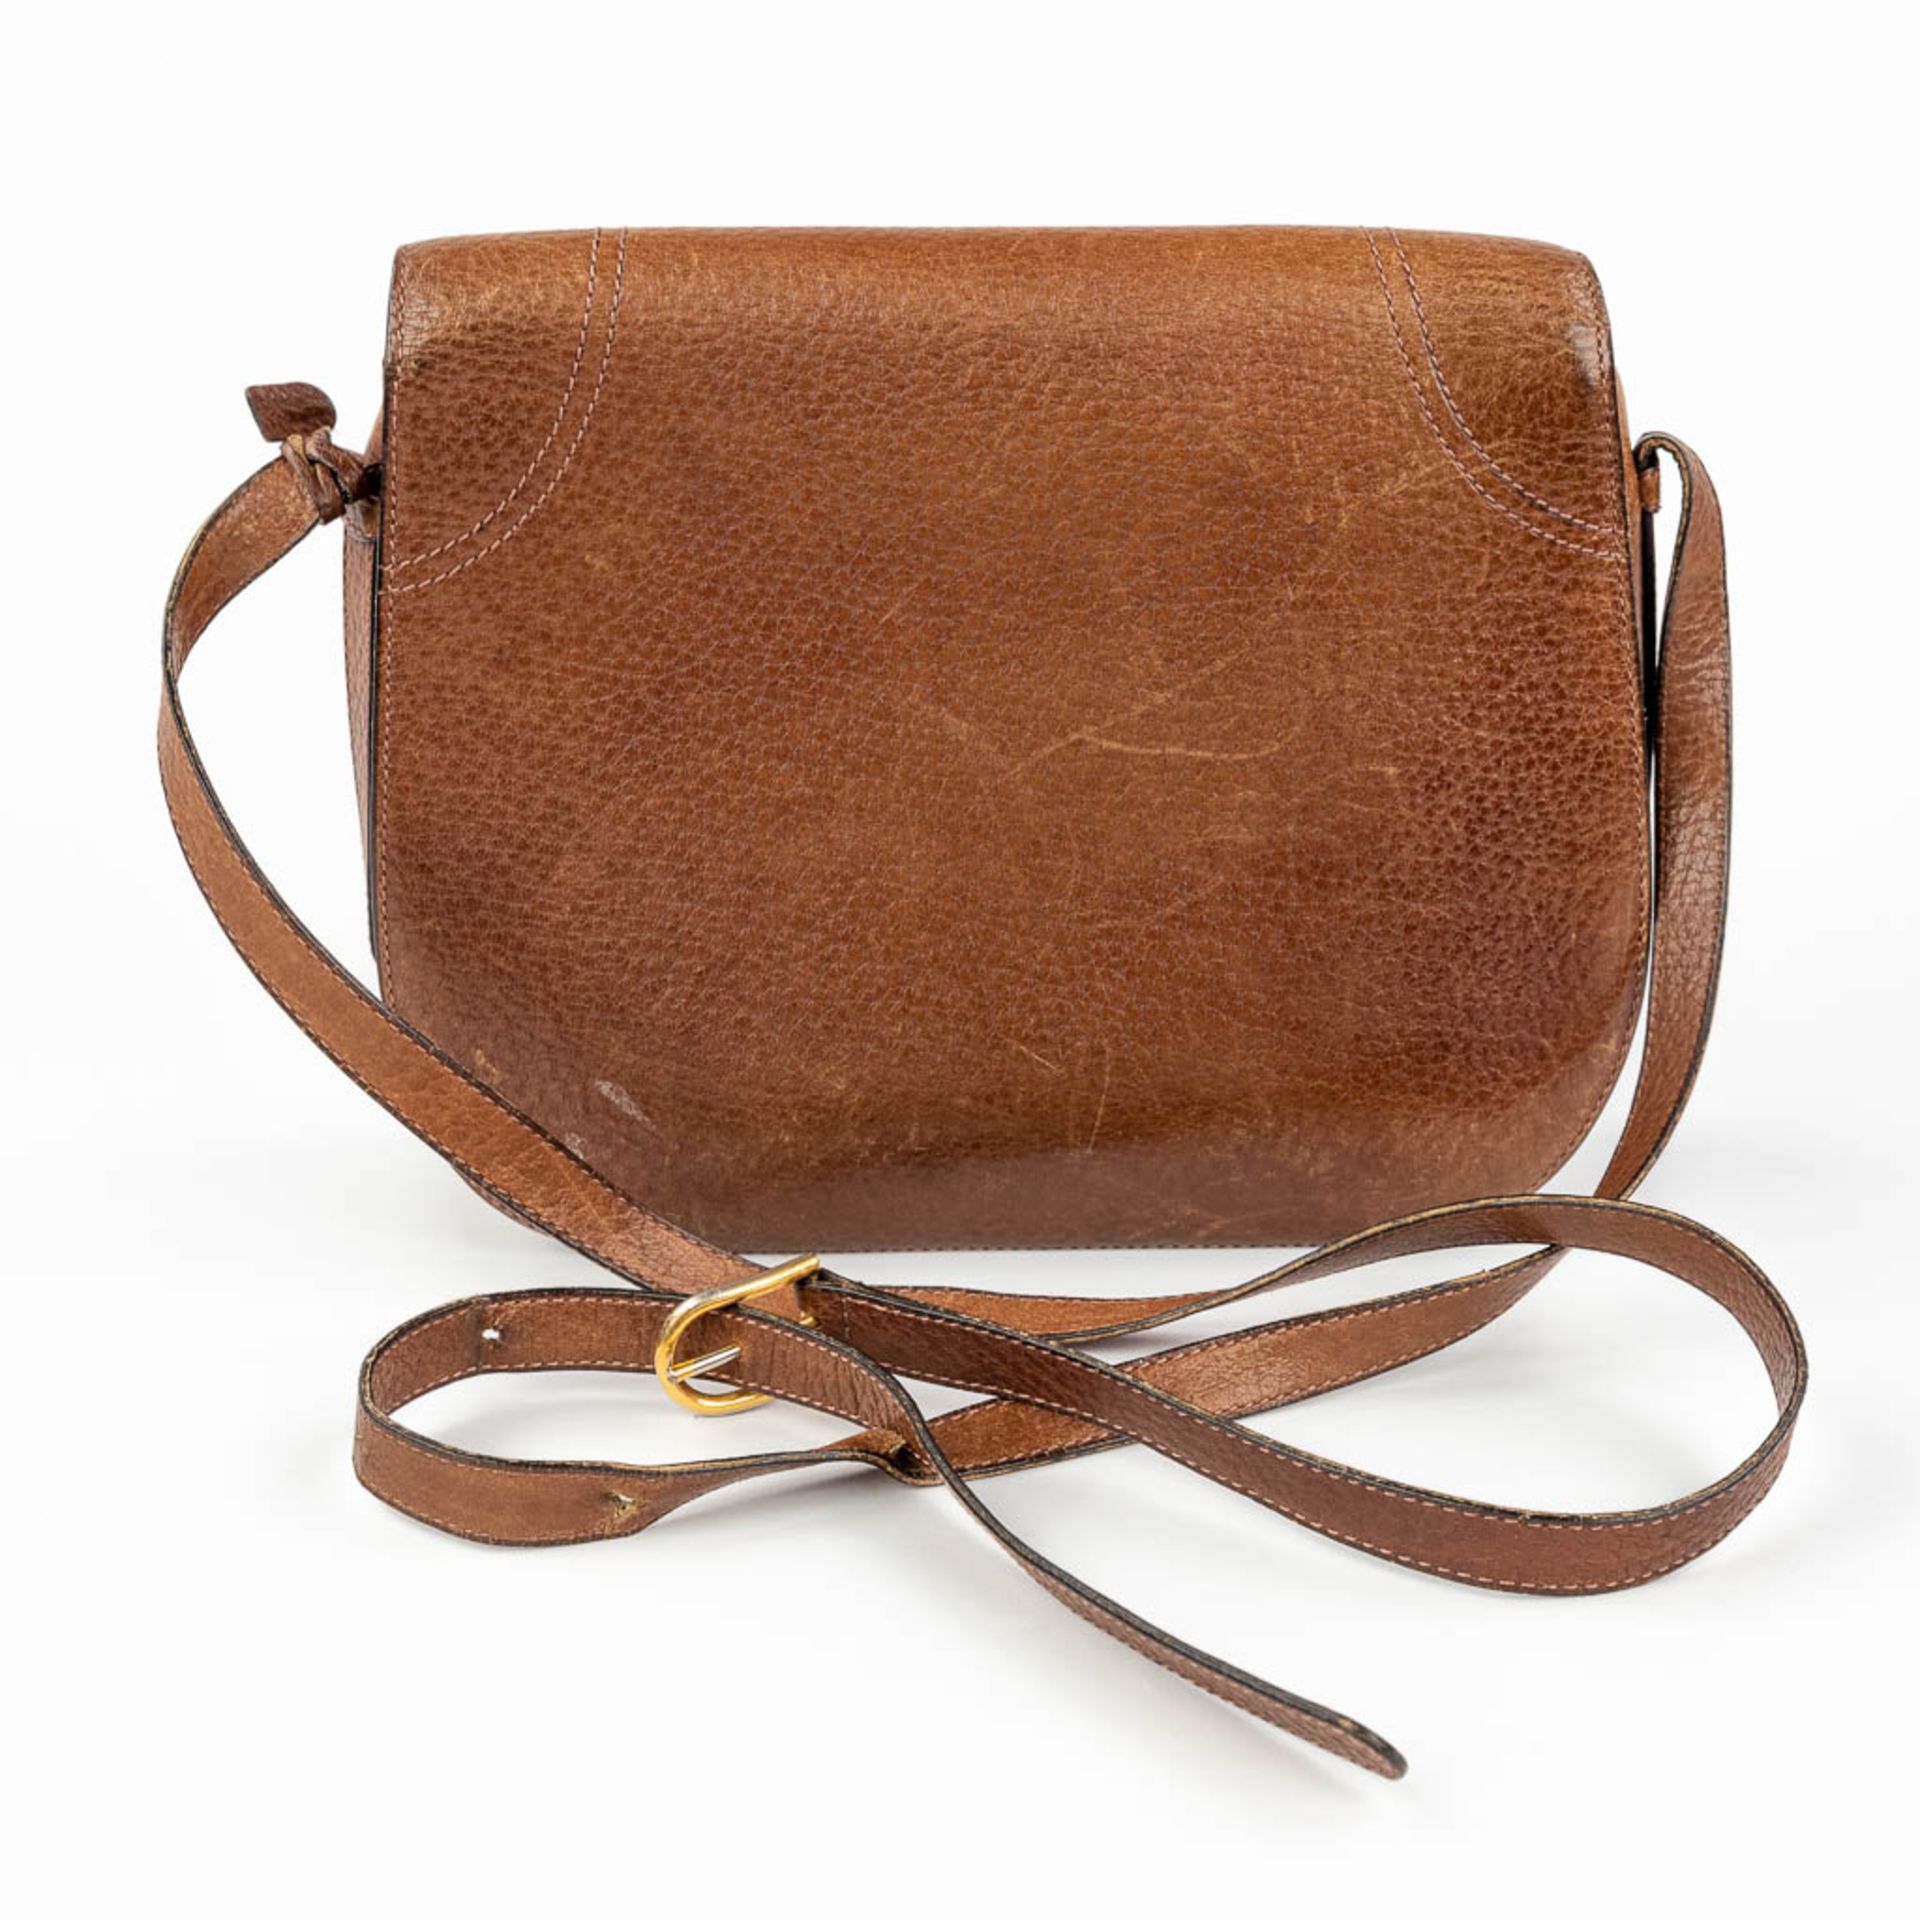 Delvaux, a cross-body handbag made of brown leather. (W:26 x H:22 cm) - Image 8 of 16